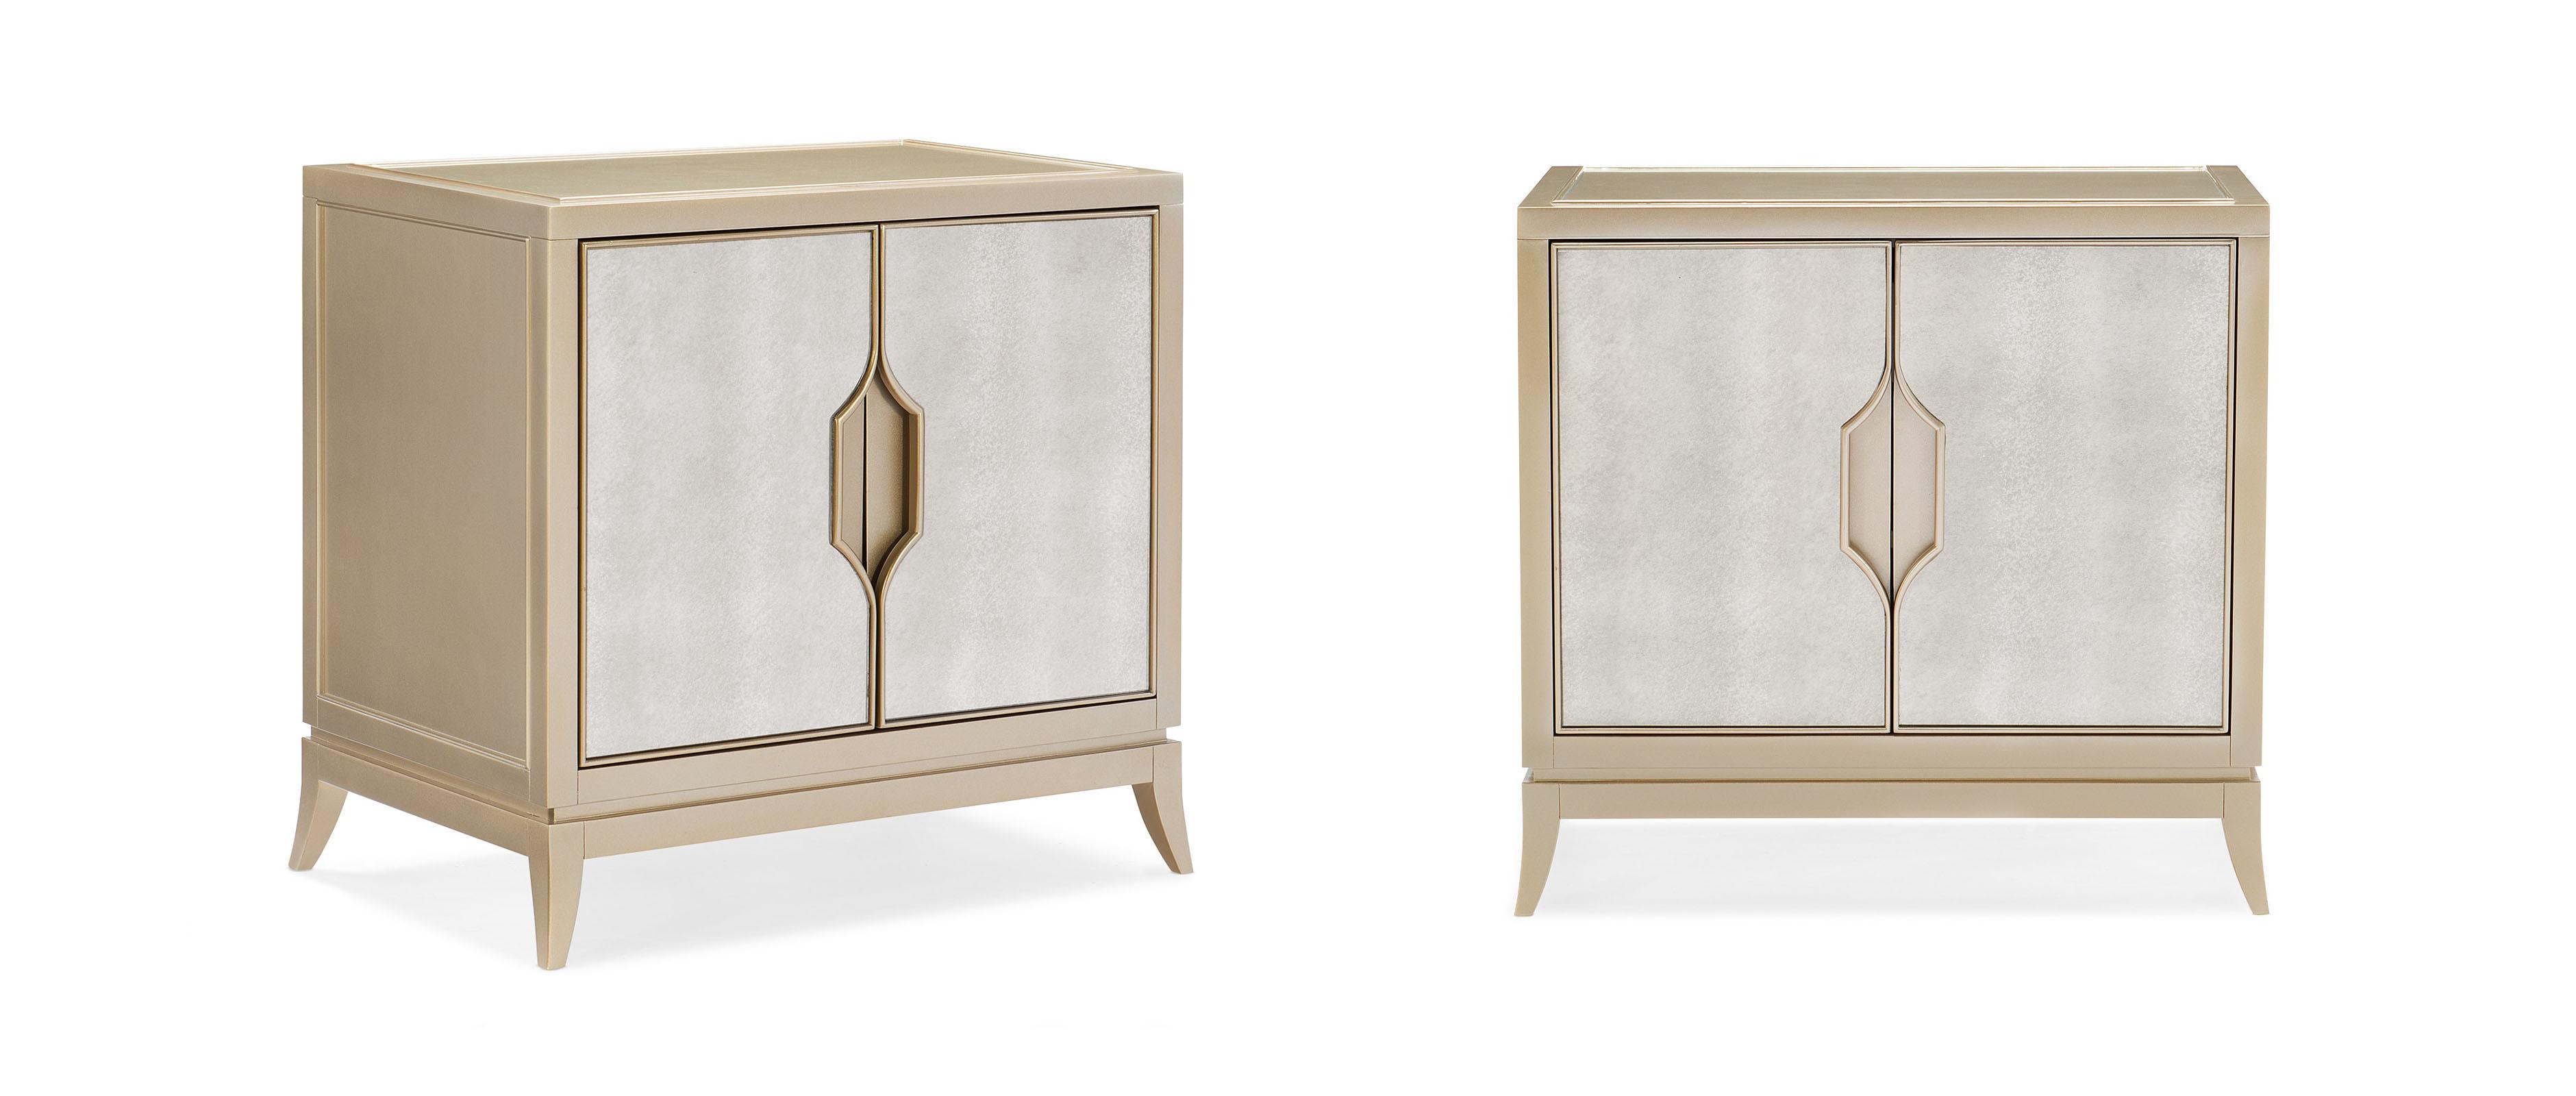 Contemporary Nightstand Set ADELA NIGHTSTAND C013-016-062-Set-2 in Mirrored, Taupe 